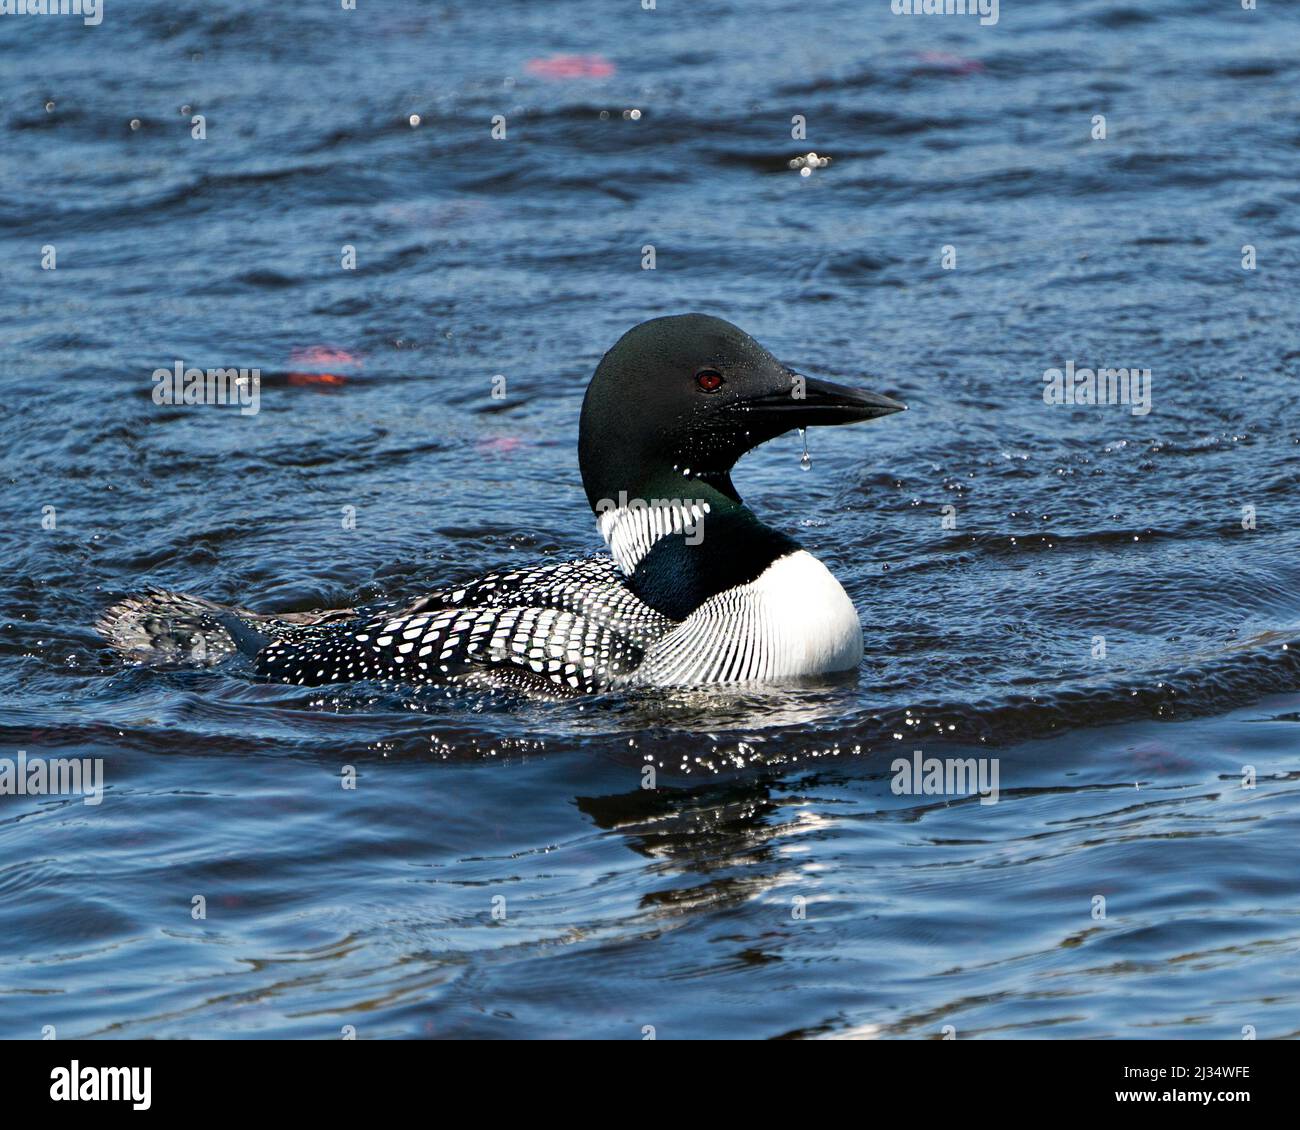 Loon close-up profile side view swimming in the lake in its environment and habitat, displaying red eye, white and black feather plumage. Stock Photo